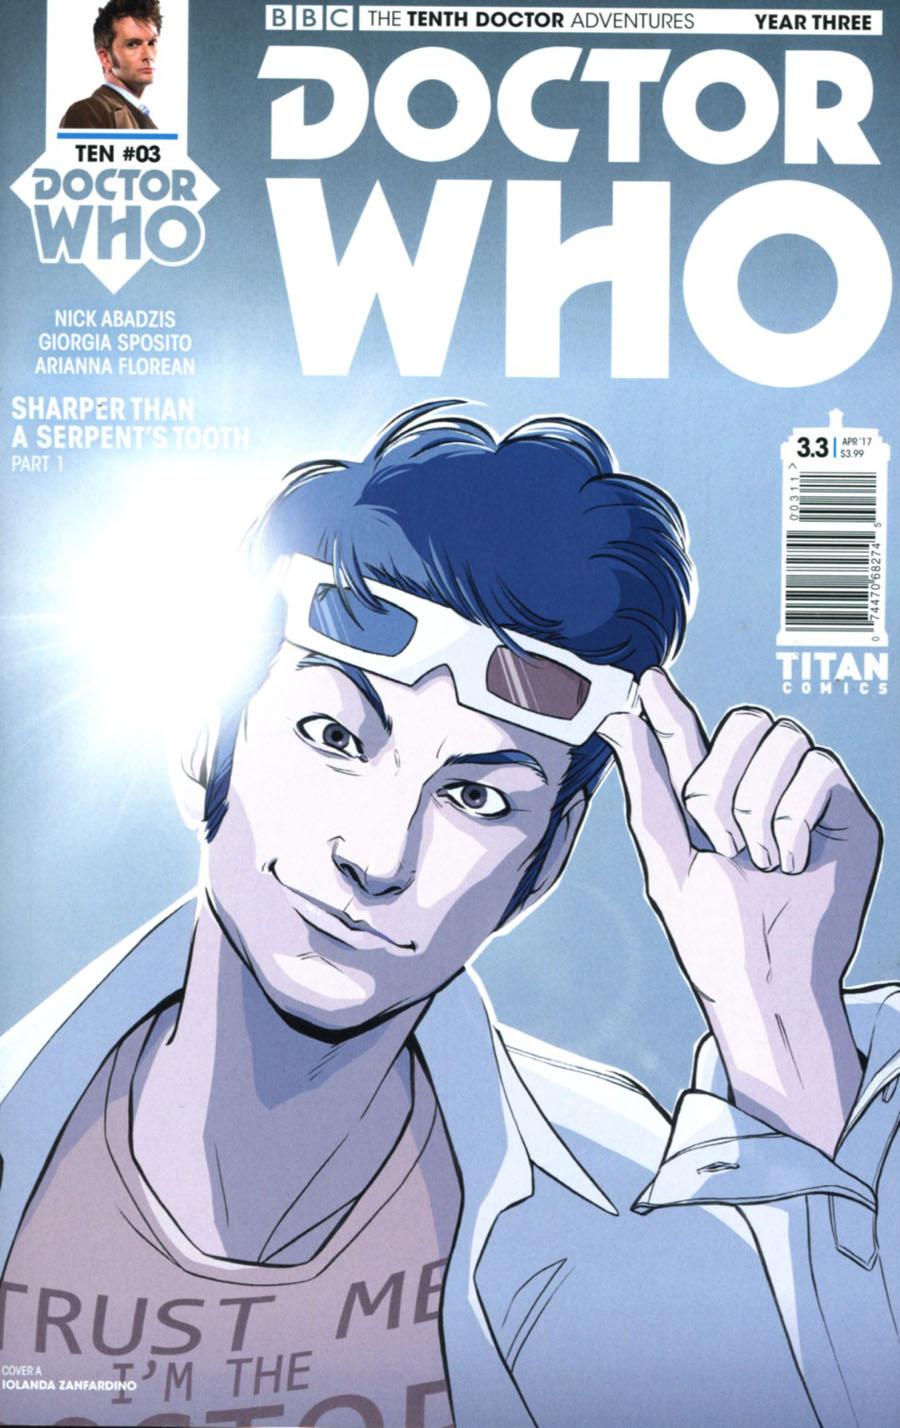 Doctor Who 10th Doctor Year Three Vol. 1 #3